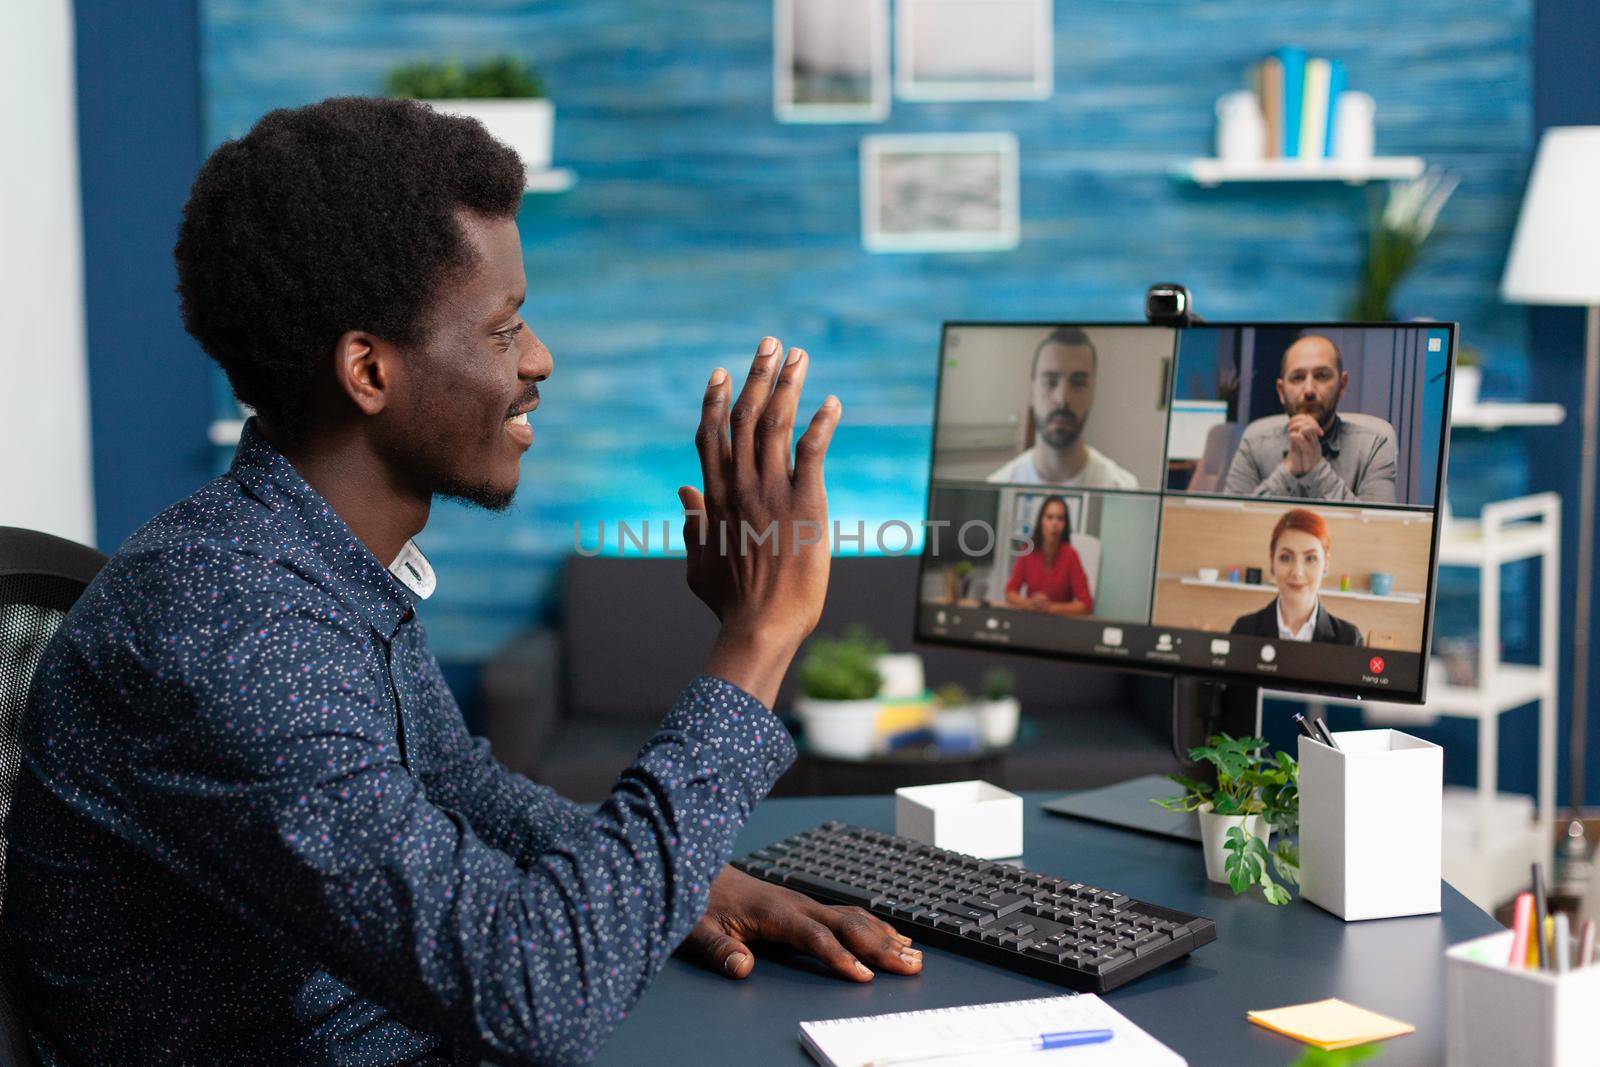 African american man on online conference video call with workmates using webcam communication. Remote internet worker working from home keeping distance while using technology